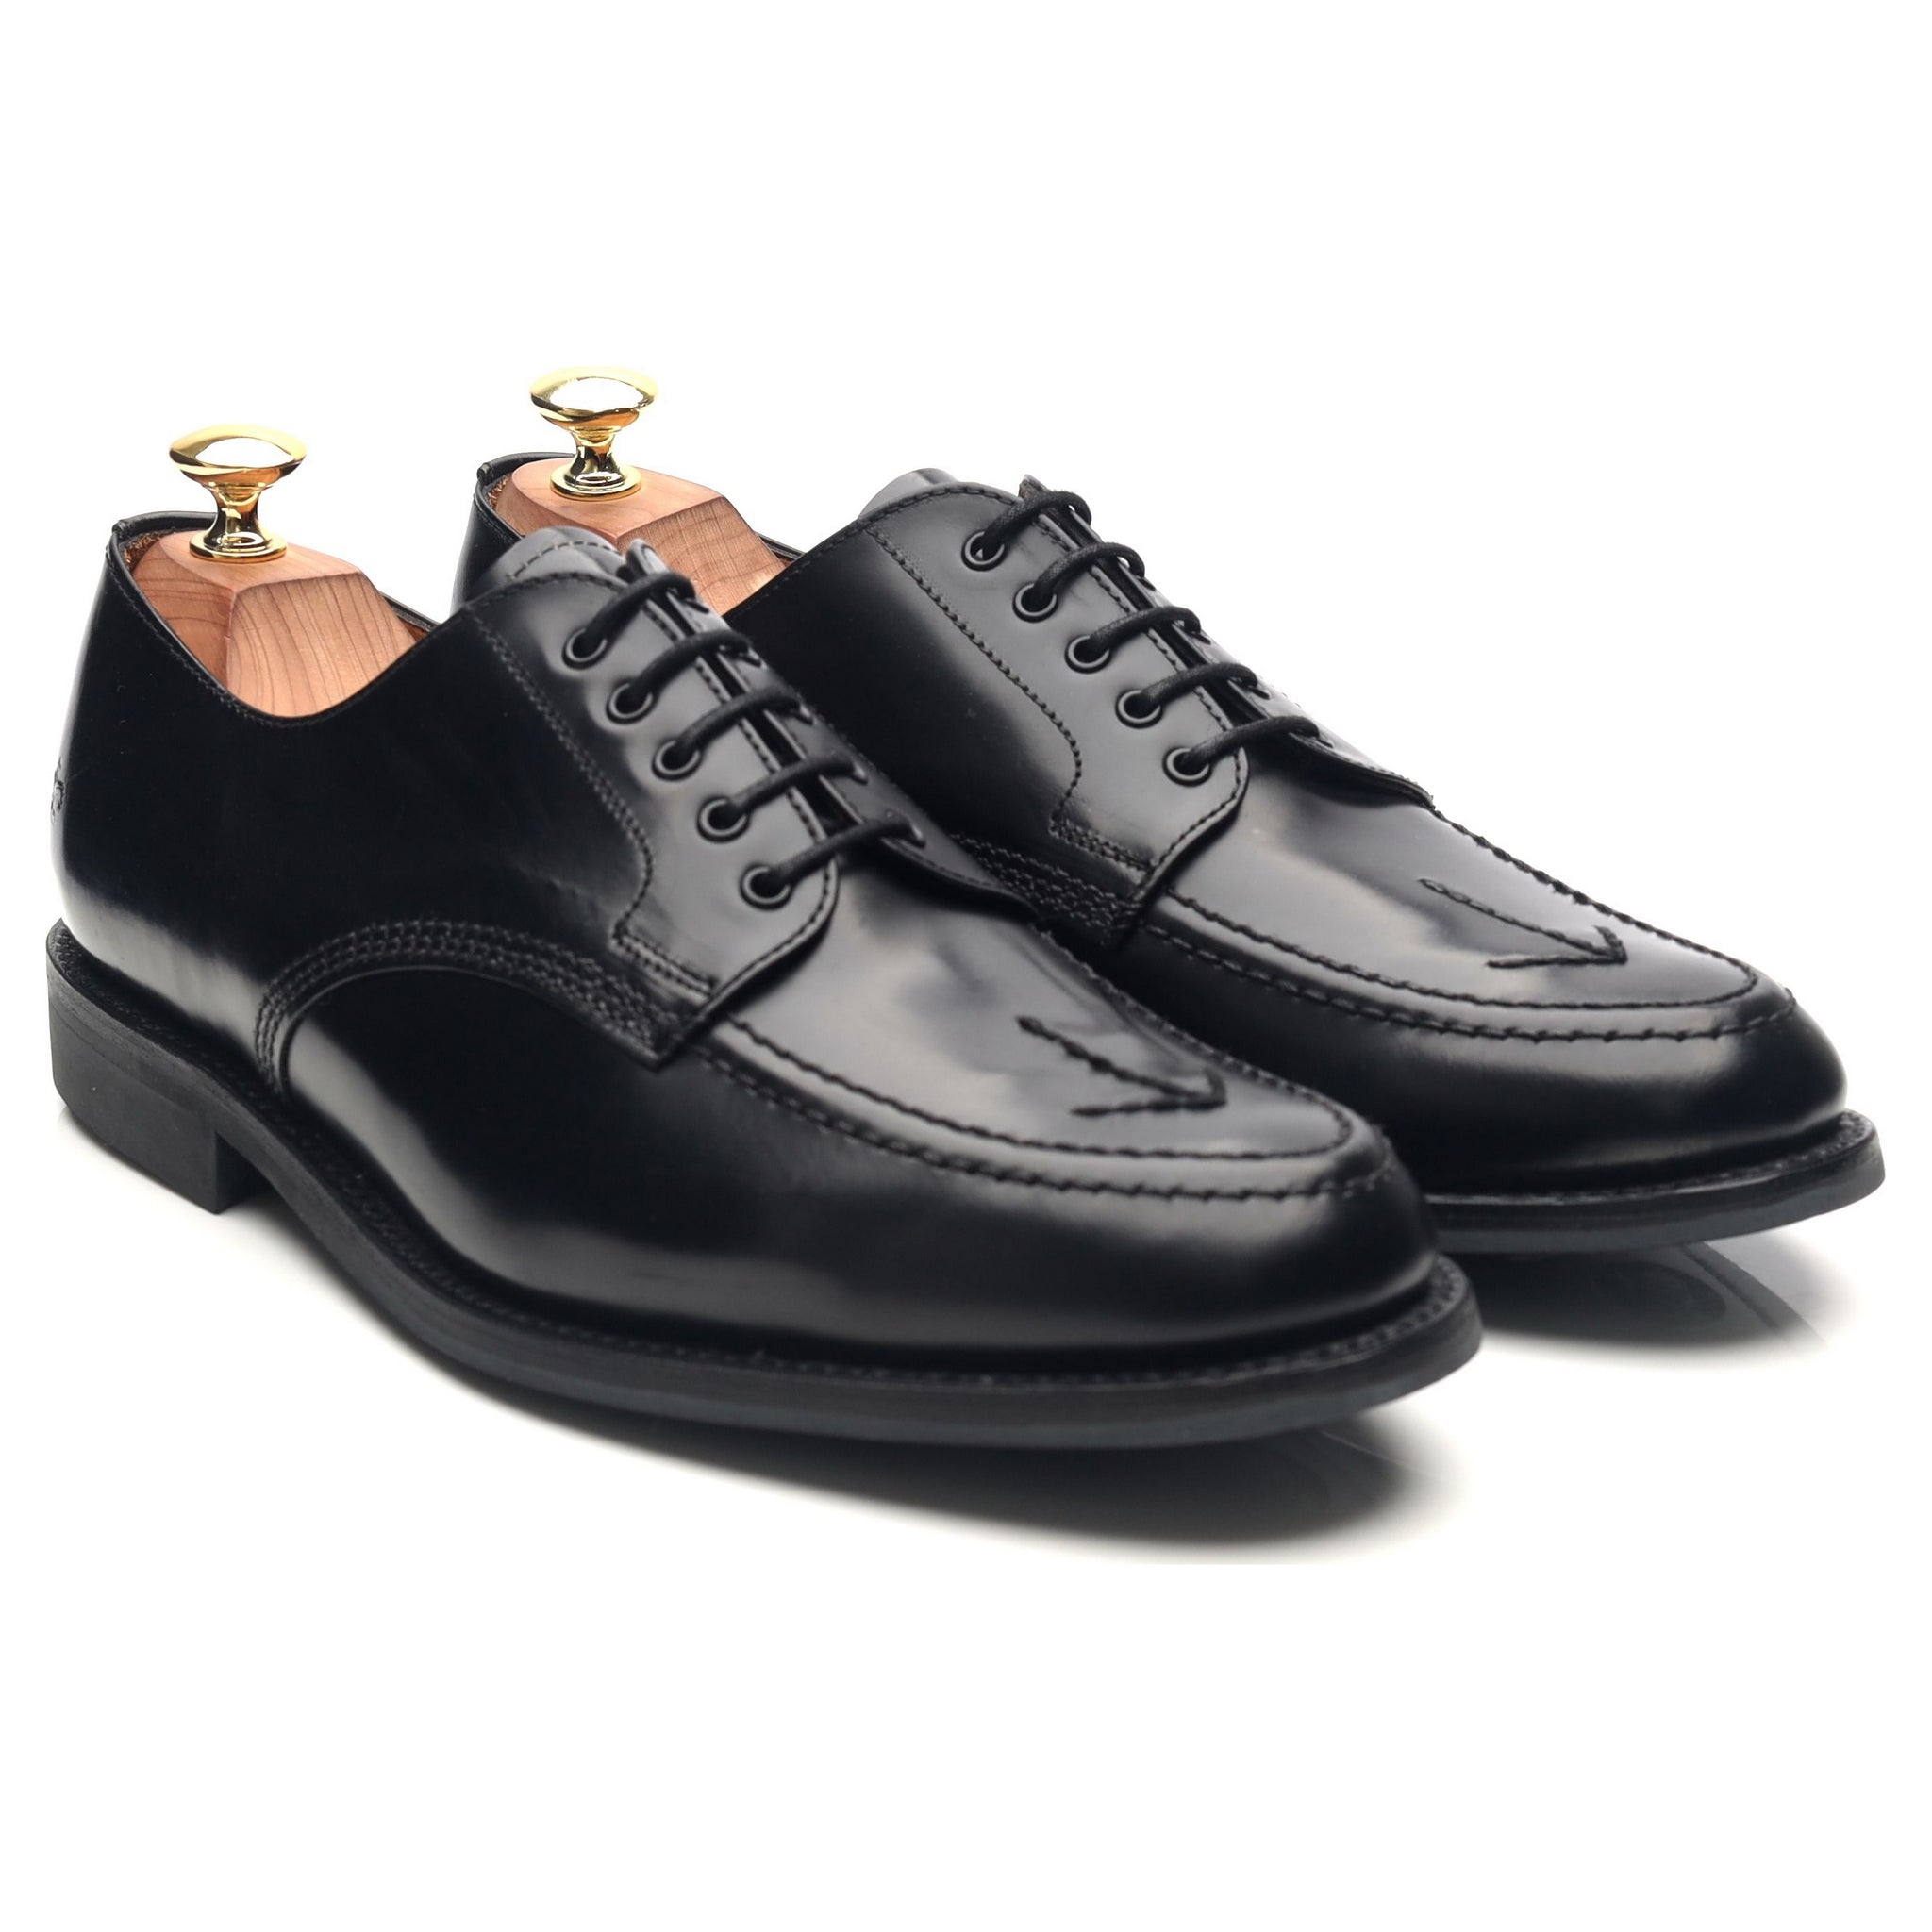 B' Black Leather Apron Derby UK 8 F   Abbot's Shoes